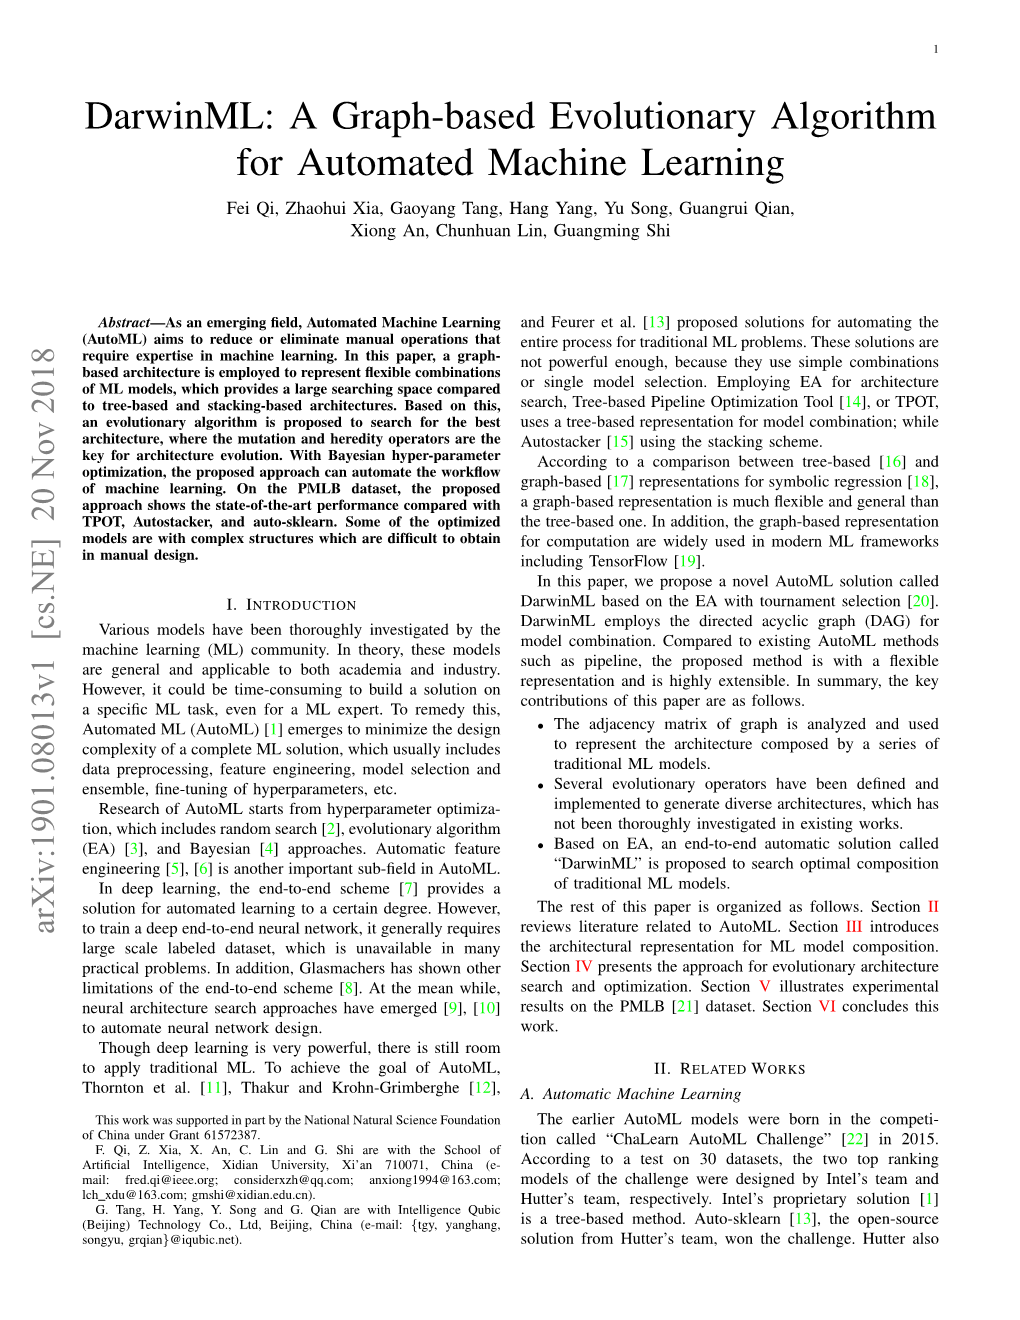 A Graph-Based Evolutionary Algorithm for Automated Machine Learning